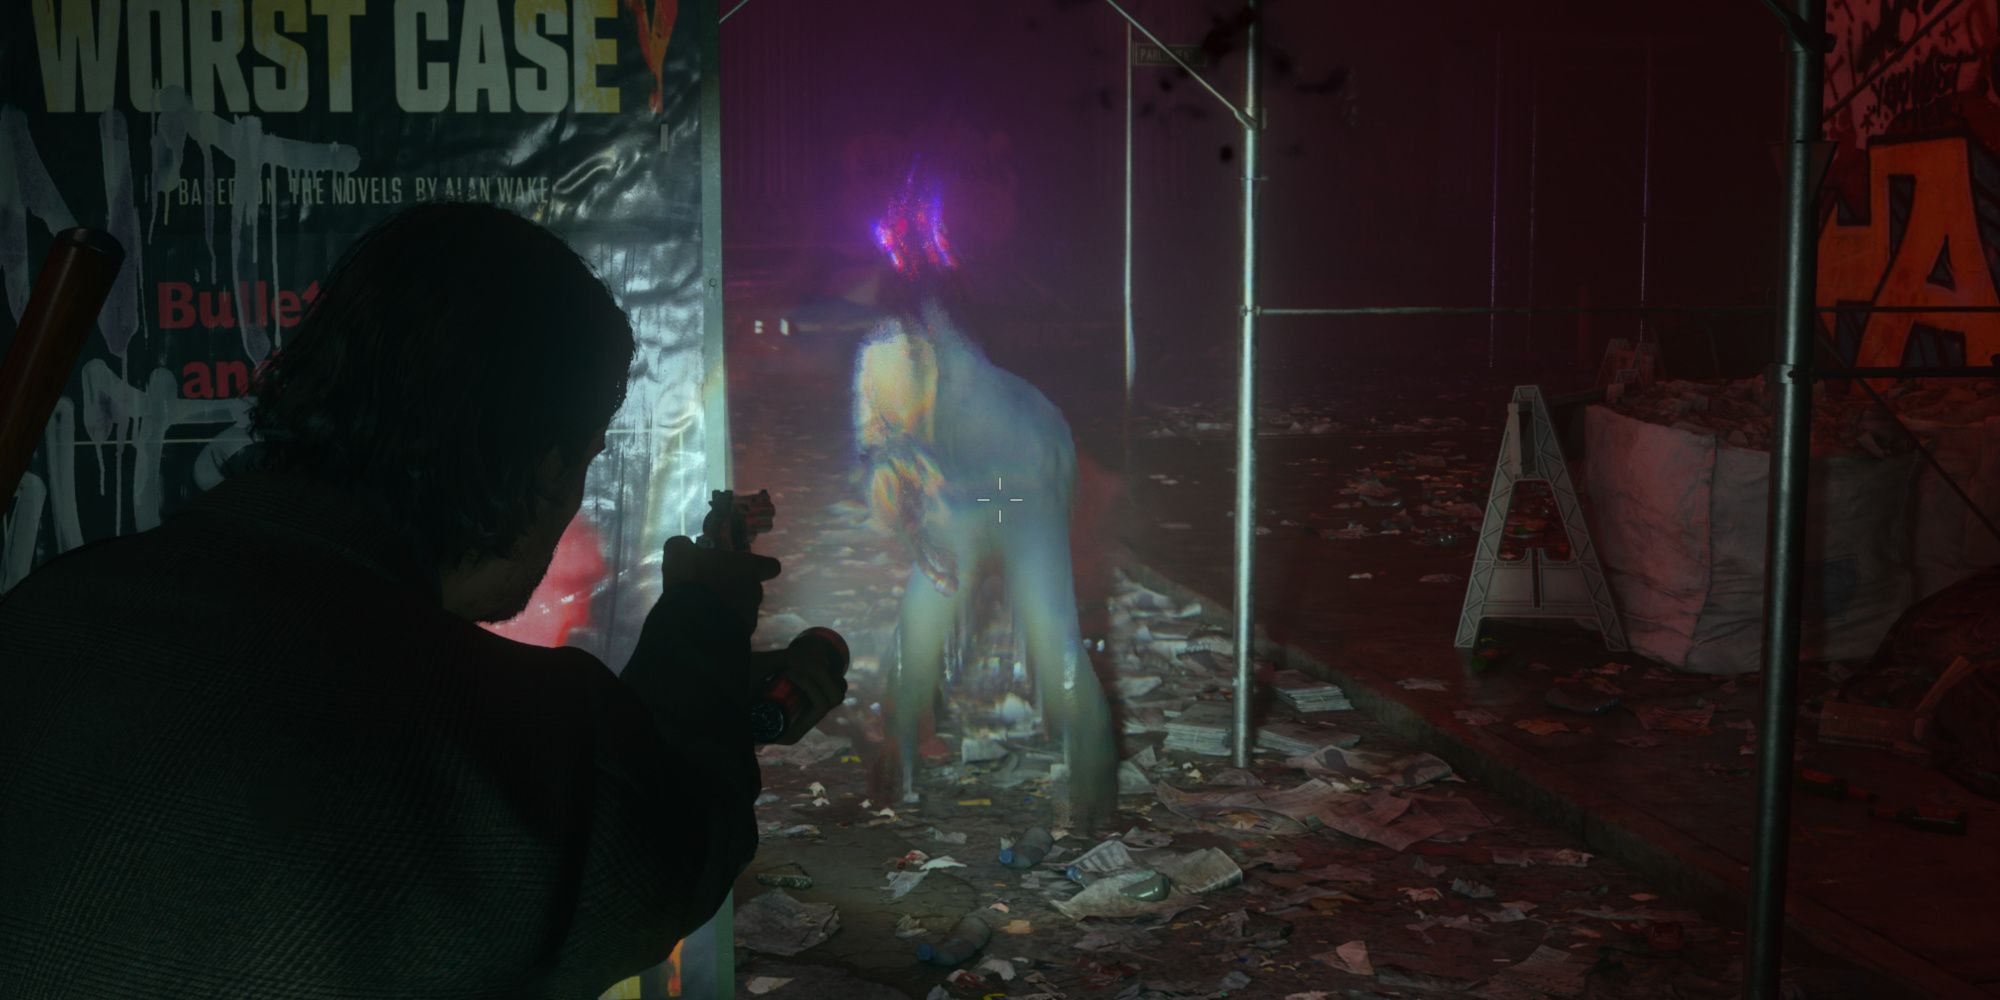 Shooting enemies with the Revolver in Alan Wake 2